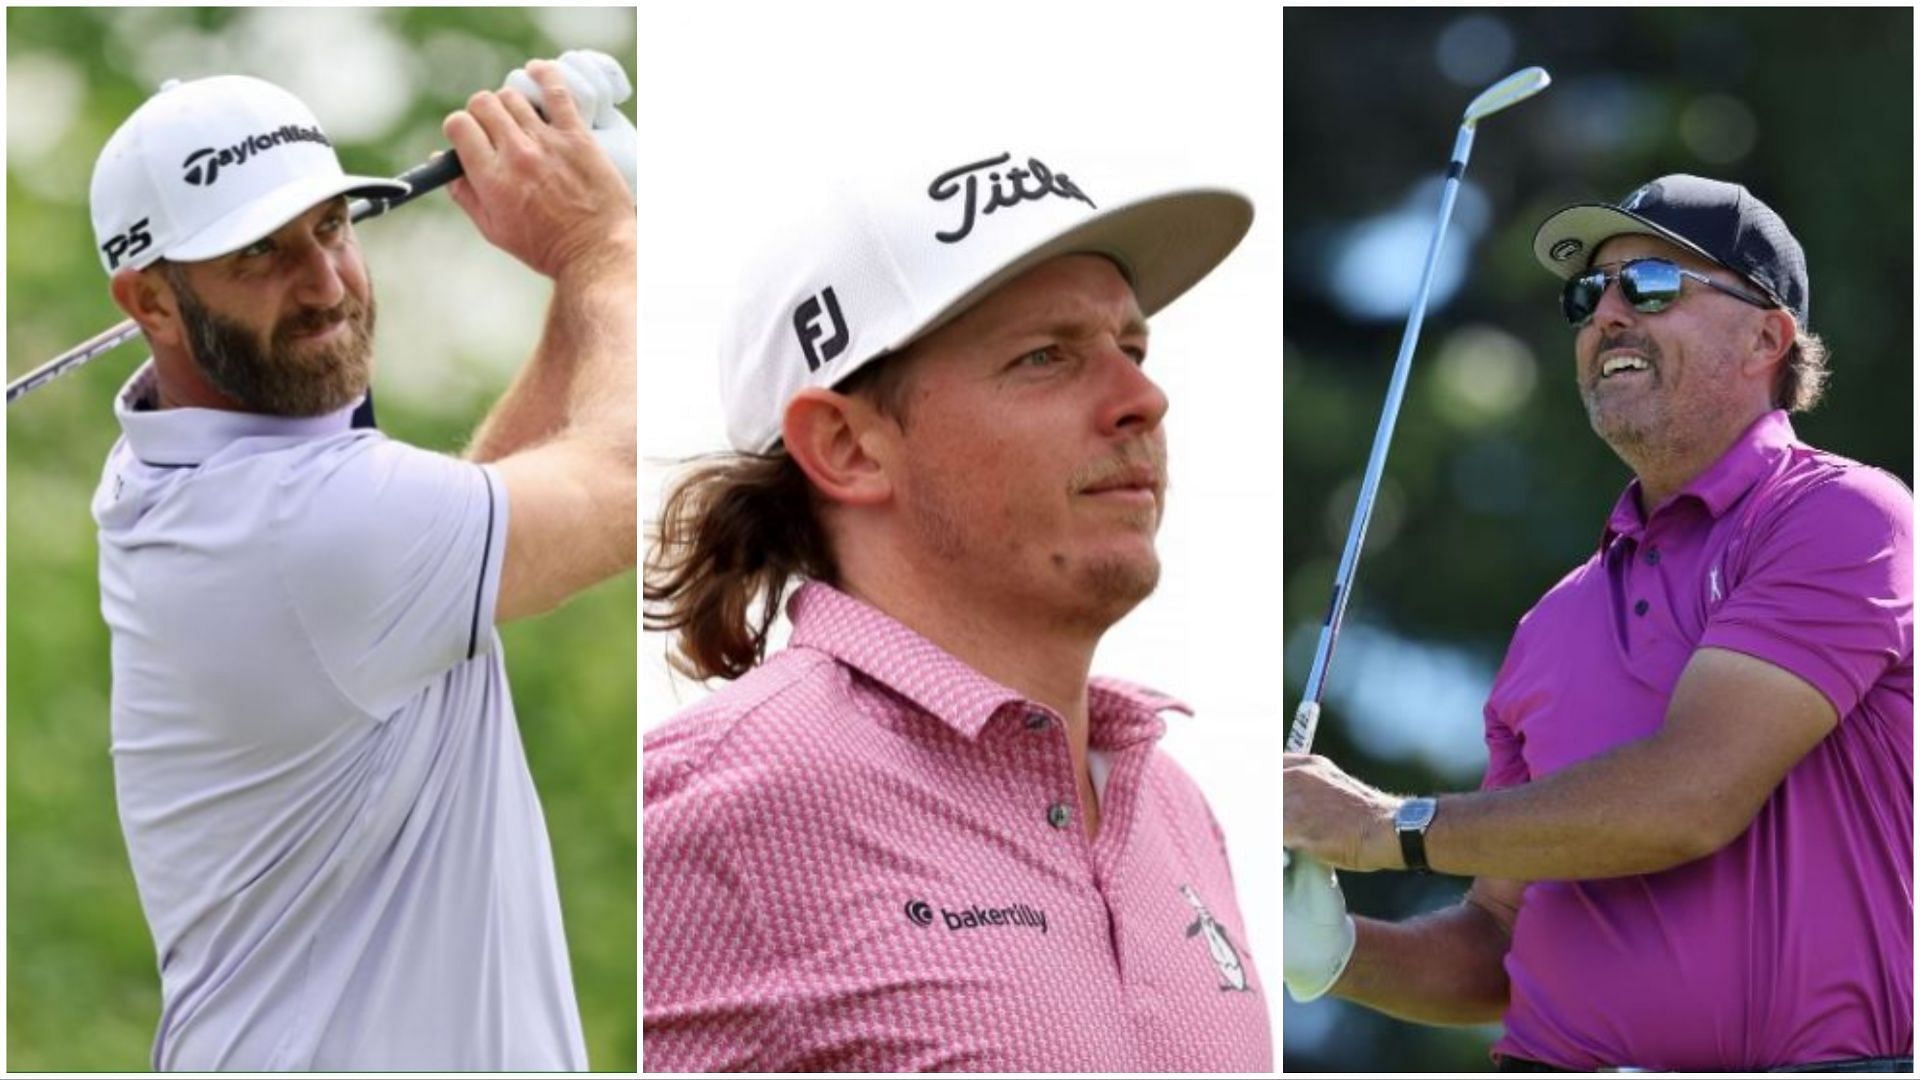 Dustin Johnson, Cameron Smith, and Phil Mickelson (via Getty Images)